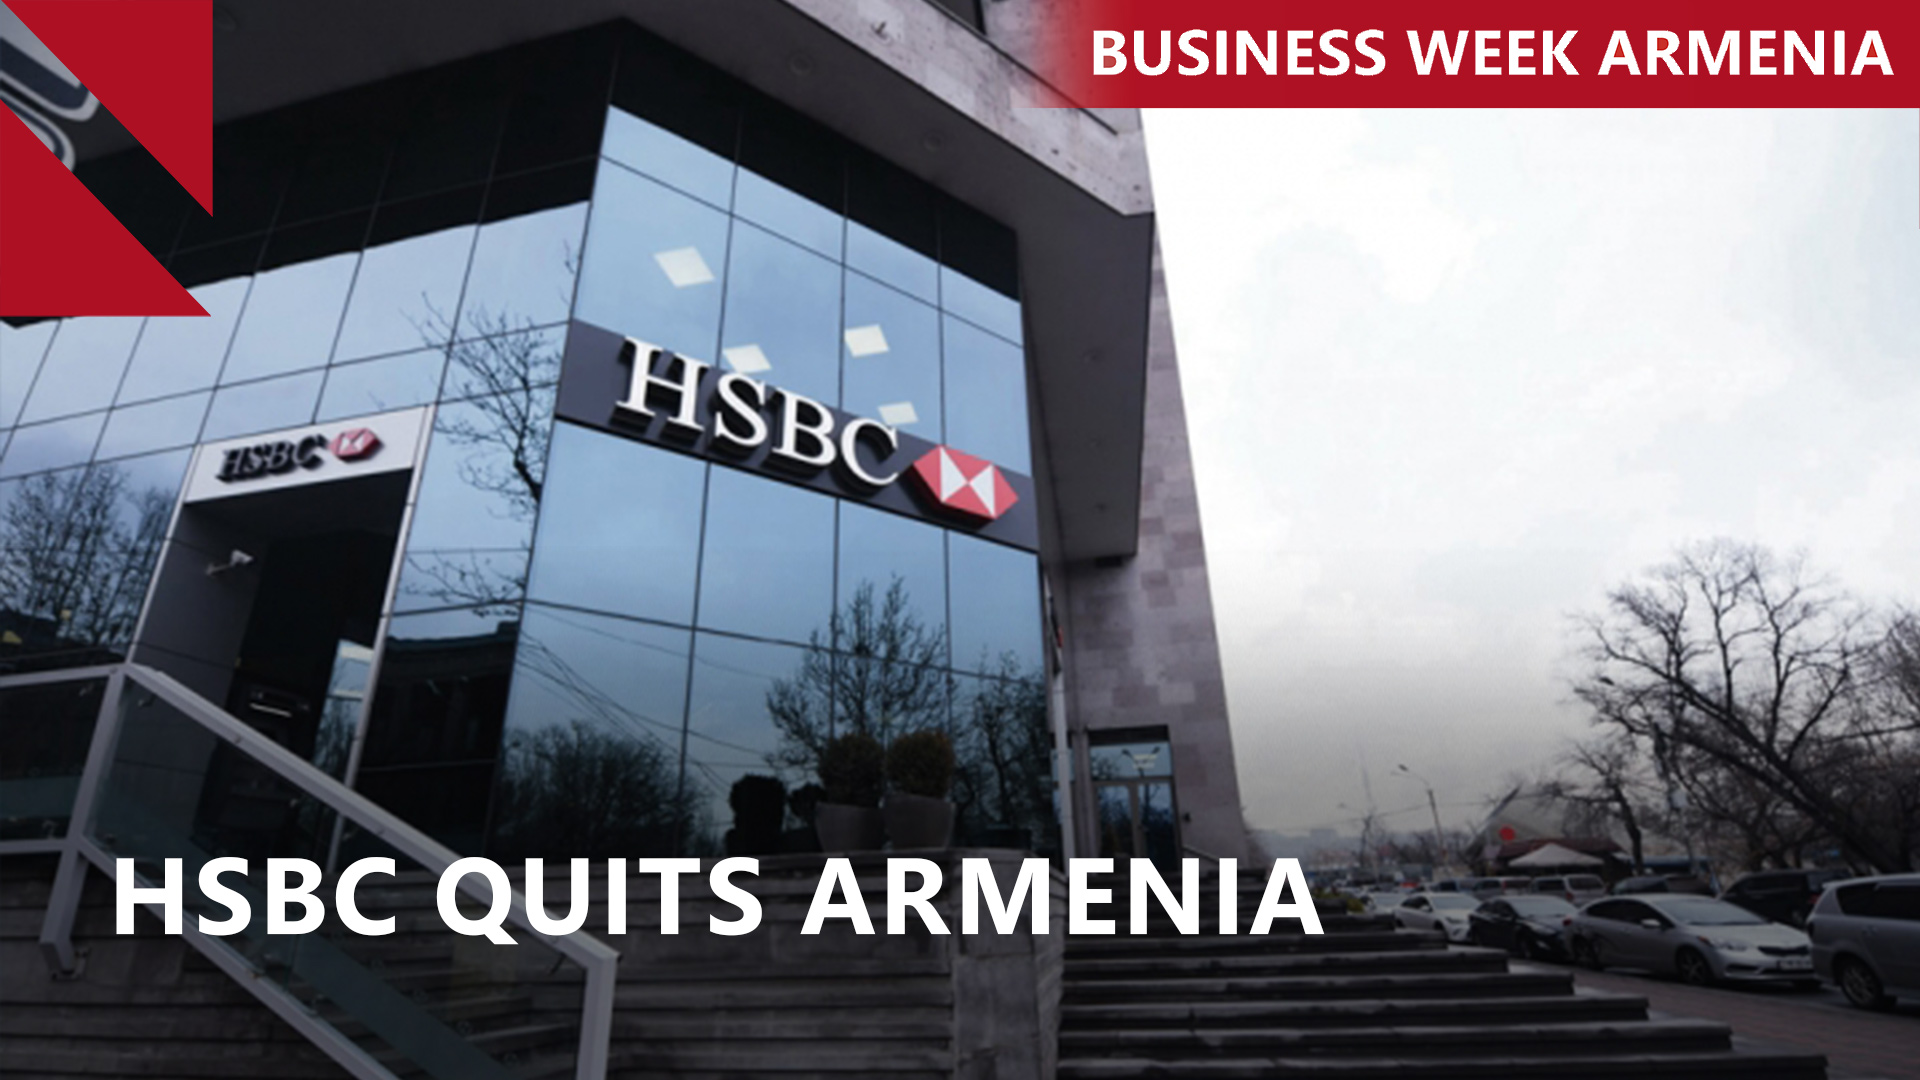 Armenia’s only Western bank to exit the country: THIS WEEK IN BUSINESS